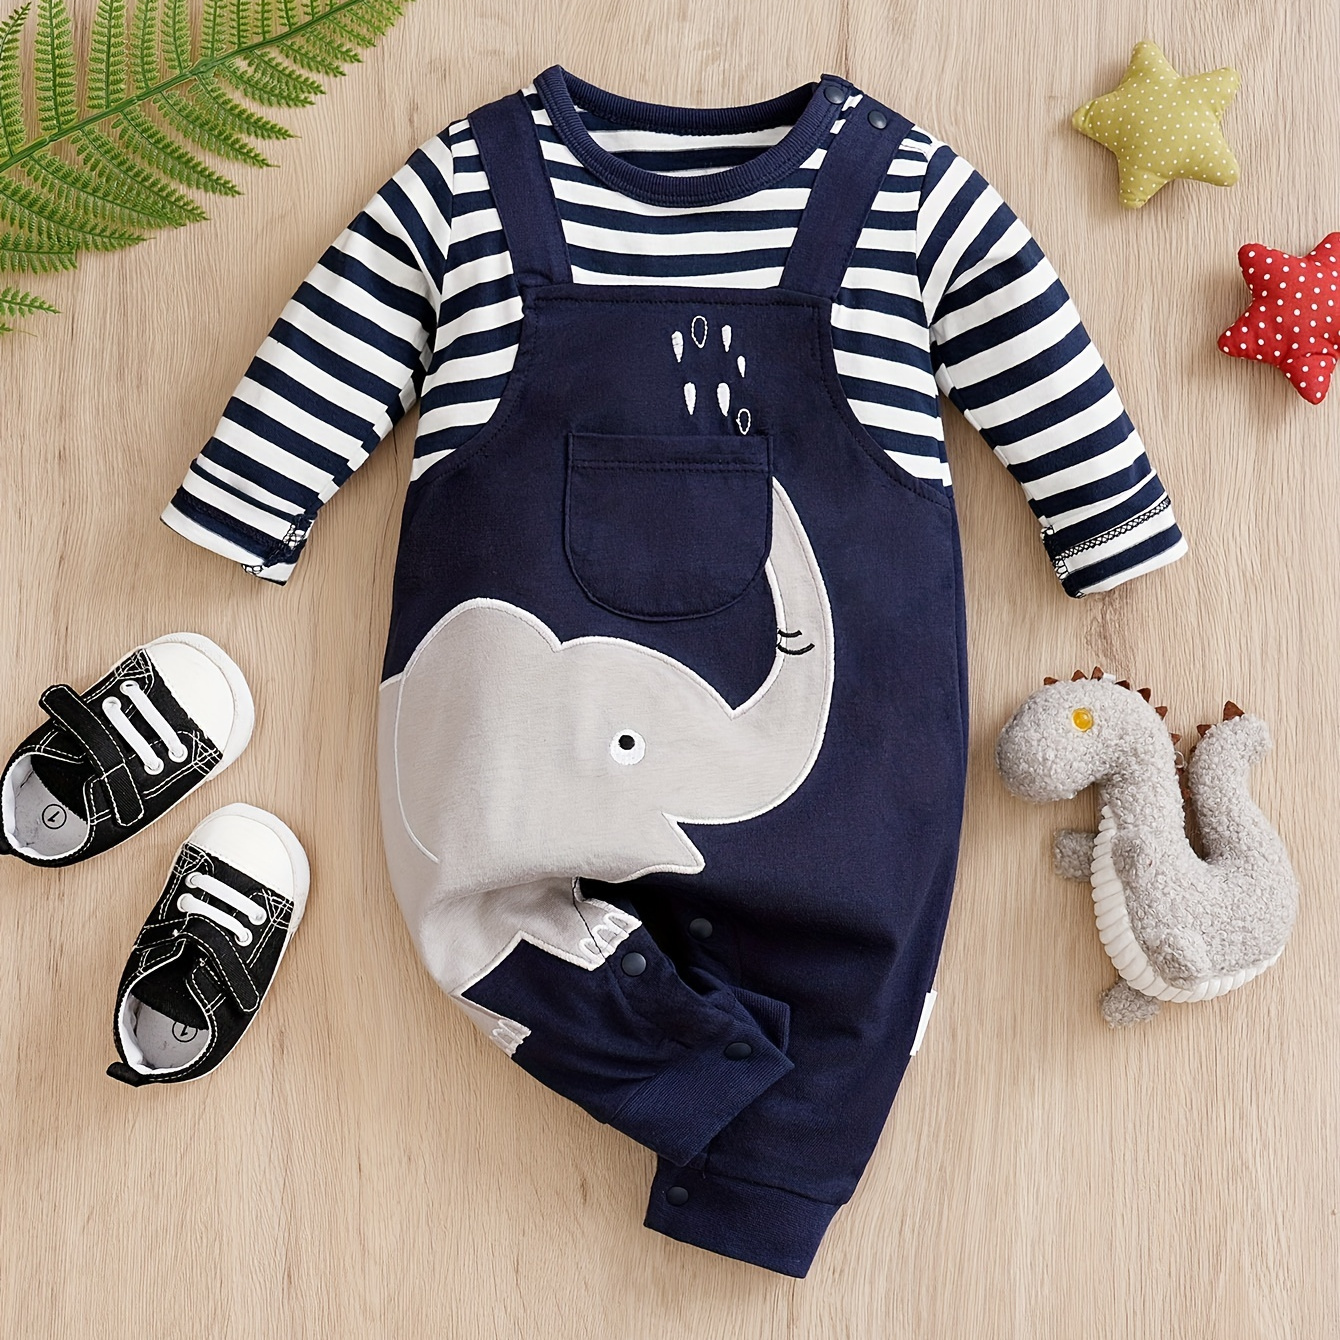 

Baby Boys Cute Elephant Print Striped Long Sleeves Romper Comfortable Breathable Casual For Spring And Autumn